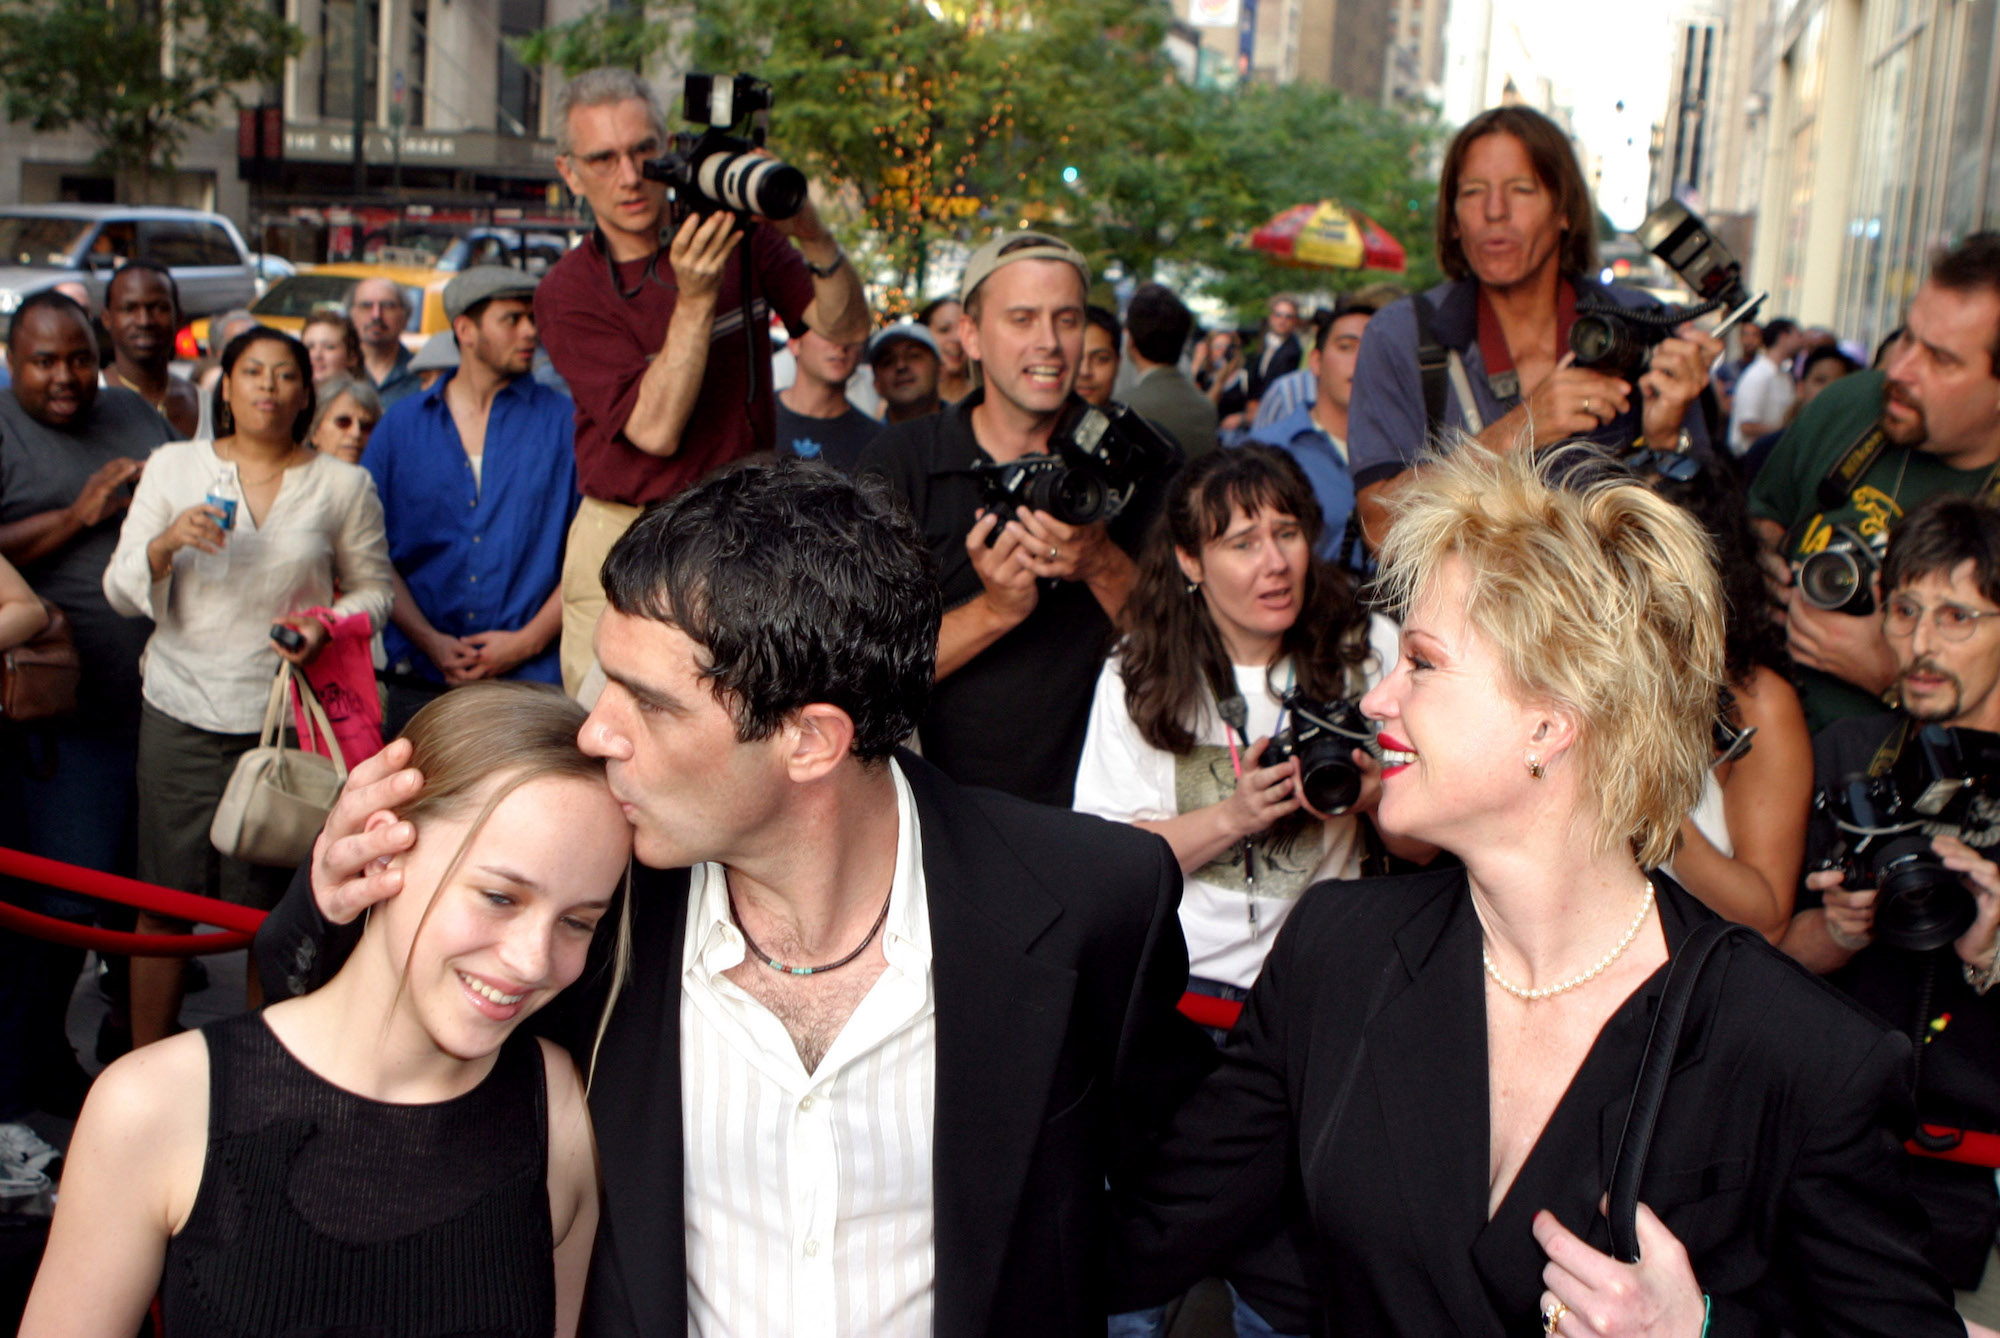 Dakota Johnson, Antonio Banderas and Melanie Griffith at the 'And Starring Pancho Villa As Himself' New York Premiere on Aug. 18, 2003.